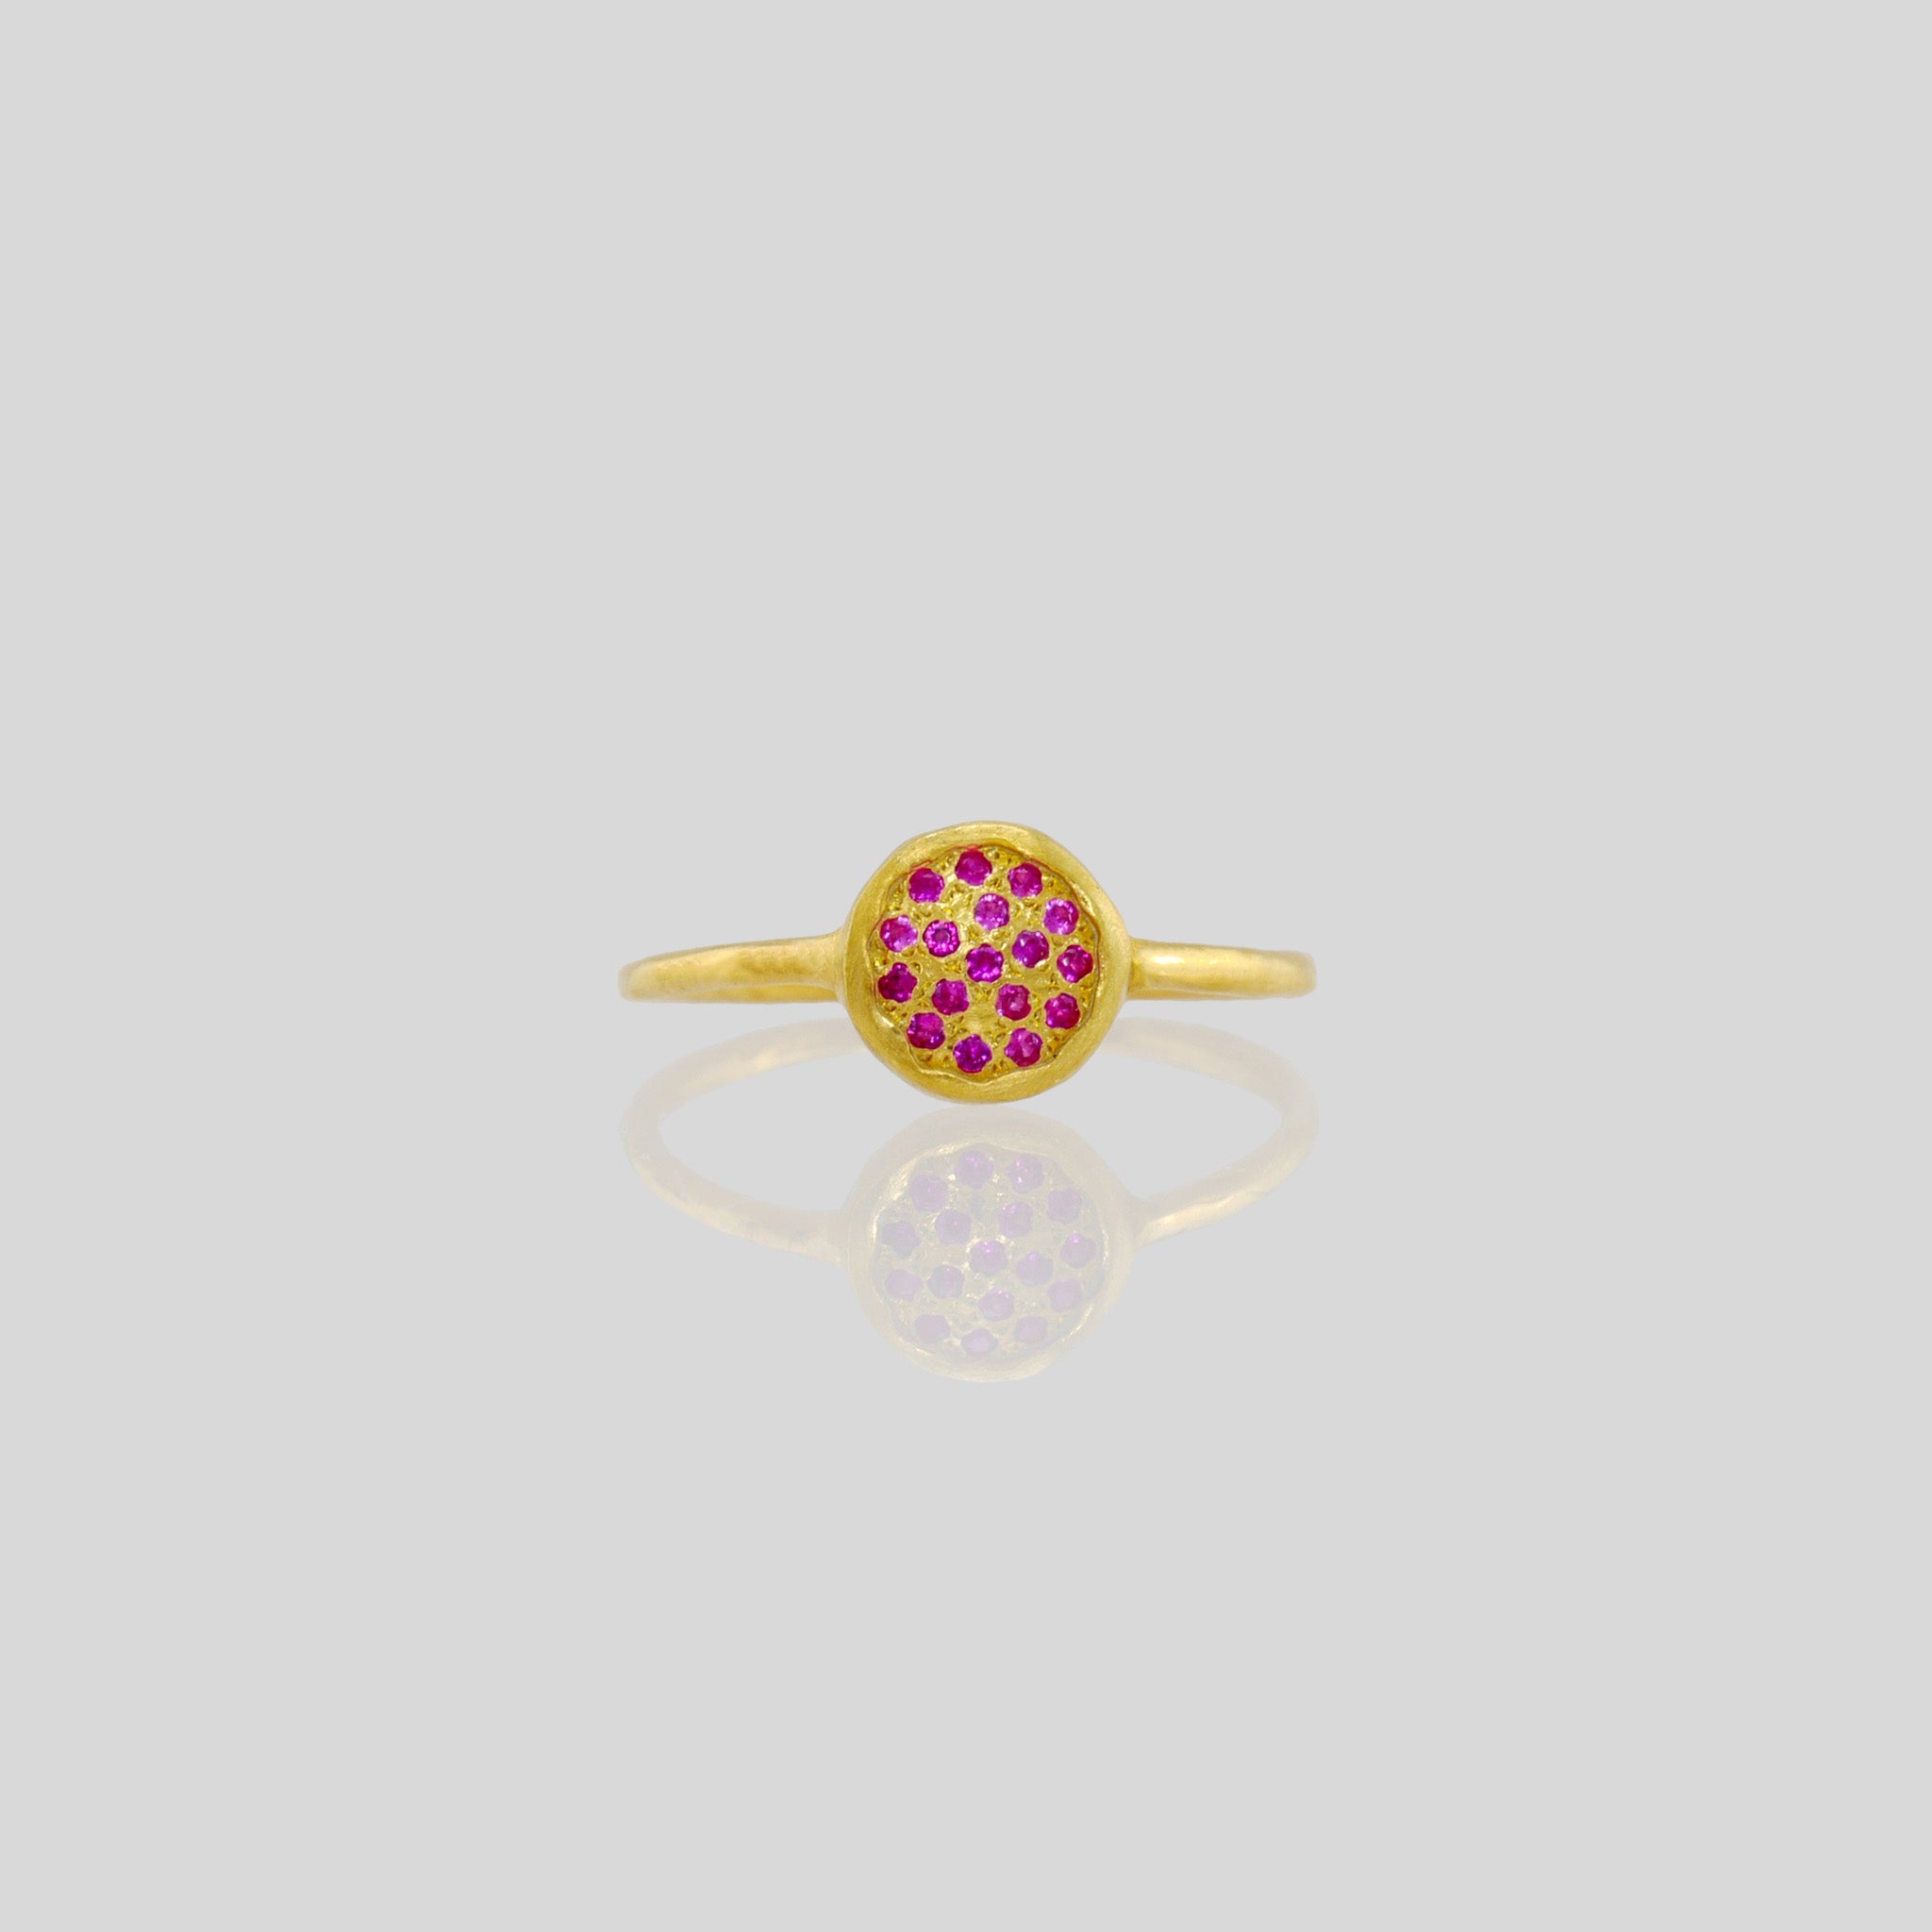 Front view of a Delicate hand-made gold ring with a circular plate set with tiny Ruby gemstones. The sparkle from the stones resembles a starry night.